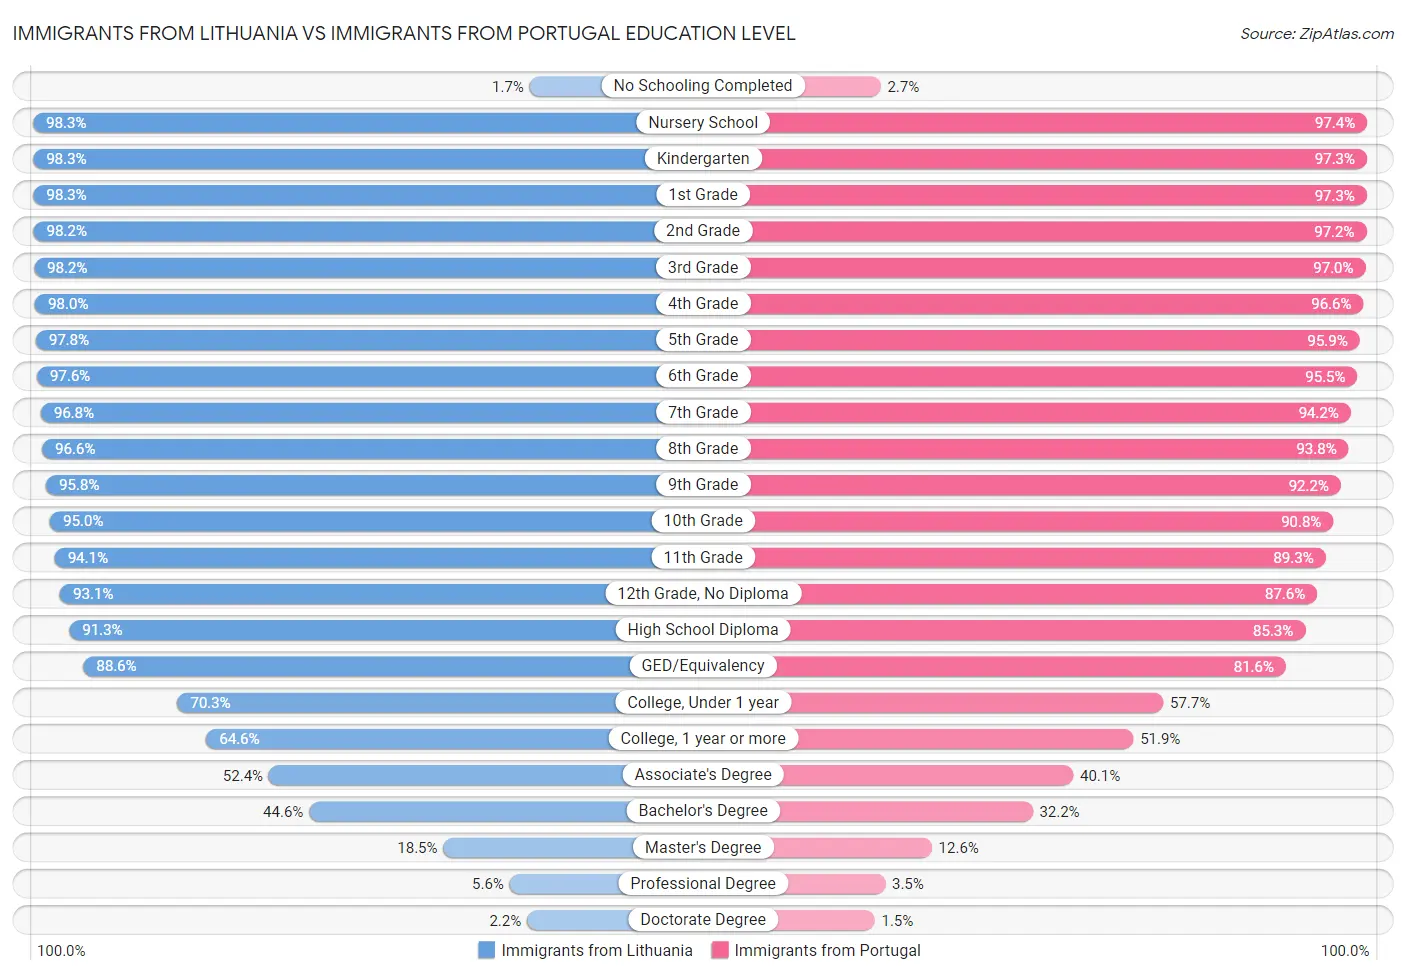 Immigrants from Lithuania vs Immigrants from Portugal Education Level